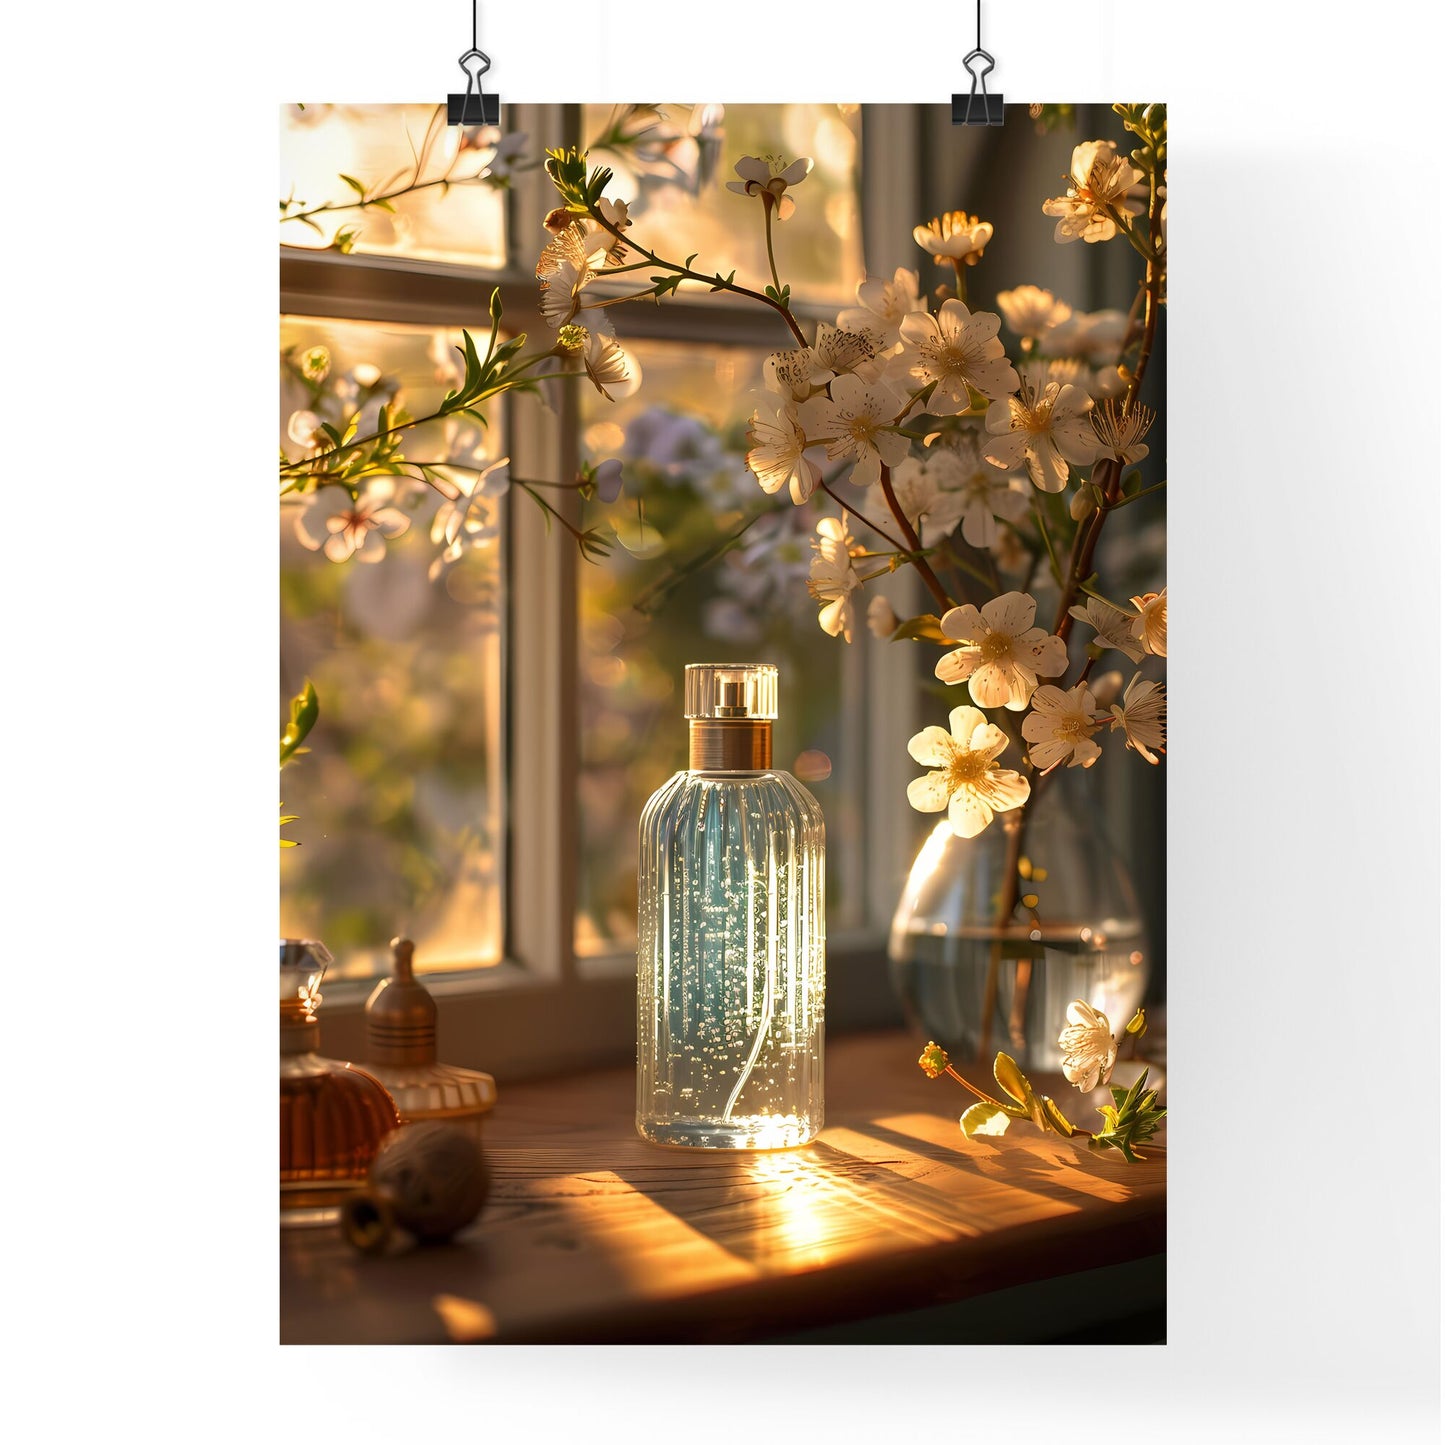 Vibrant Still Life of Perfume and Flowers with Artistic Focus in Sunny Ambiance Default Title